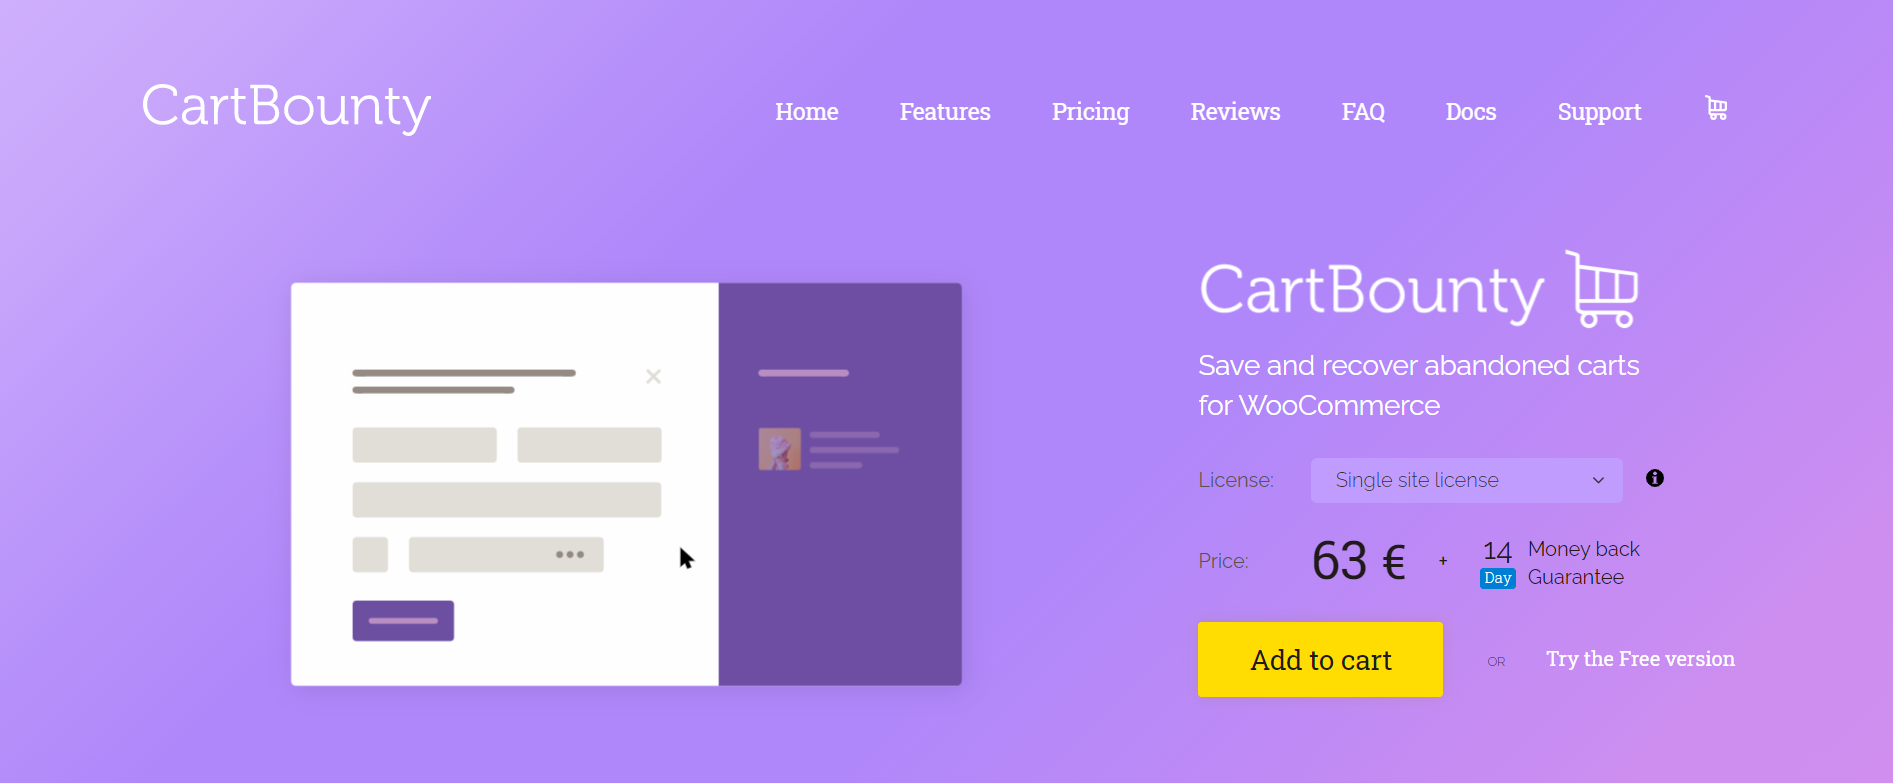 CartBounty Pro 9.6.1 – Save and recover abandoned carts for WooCommerce